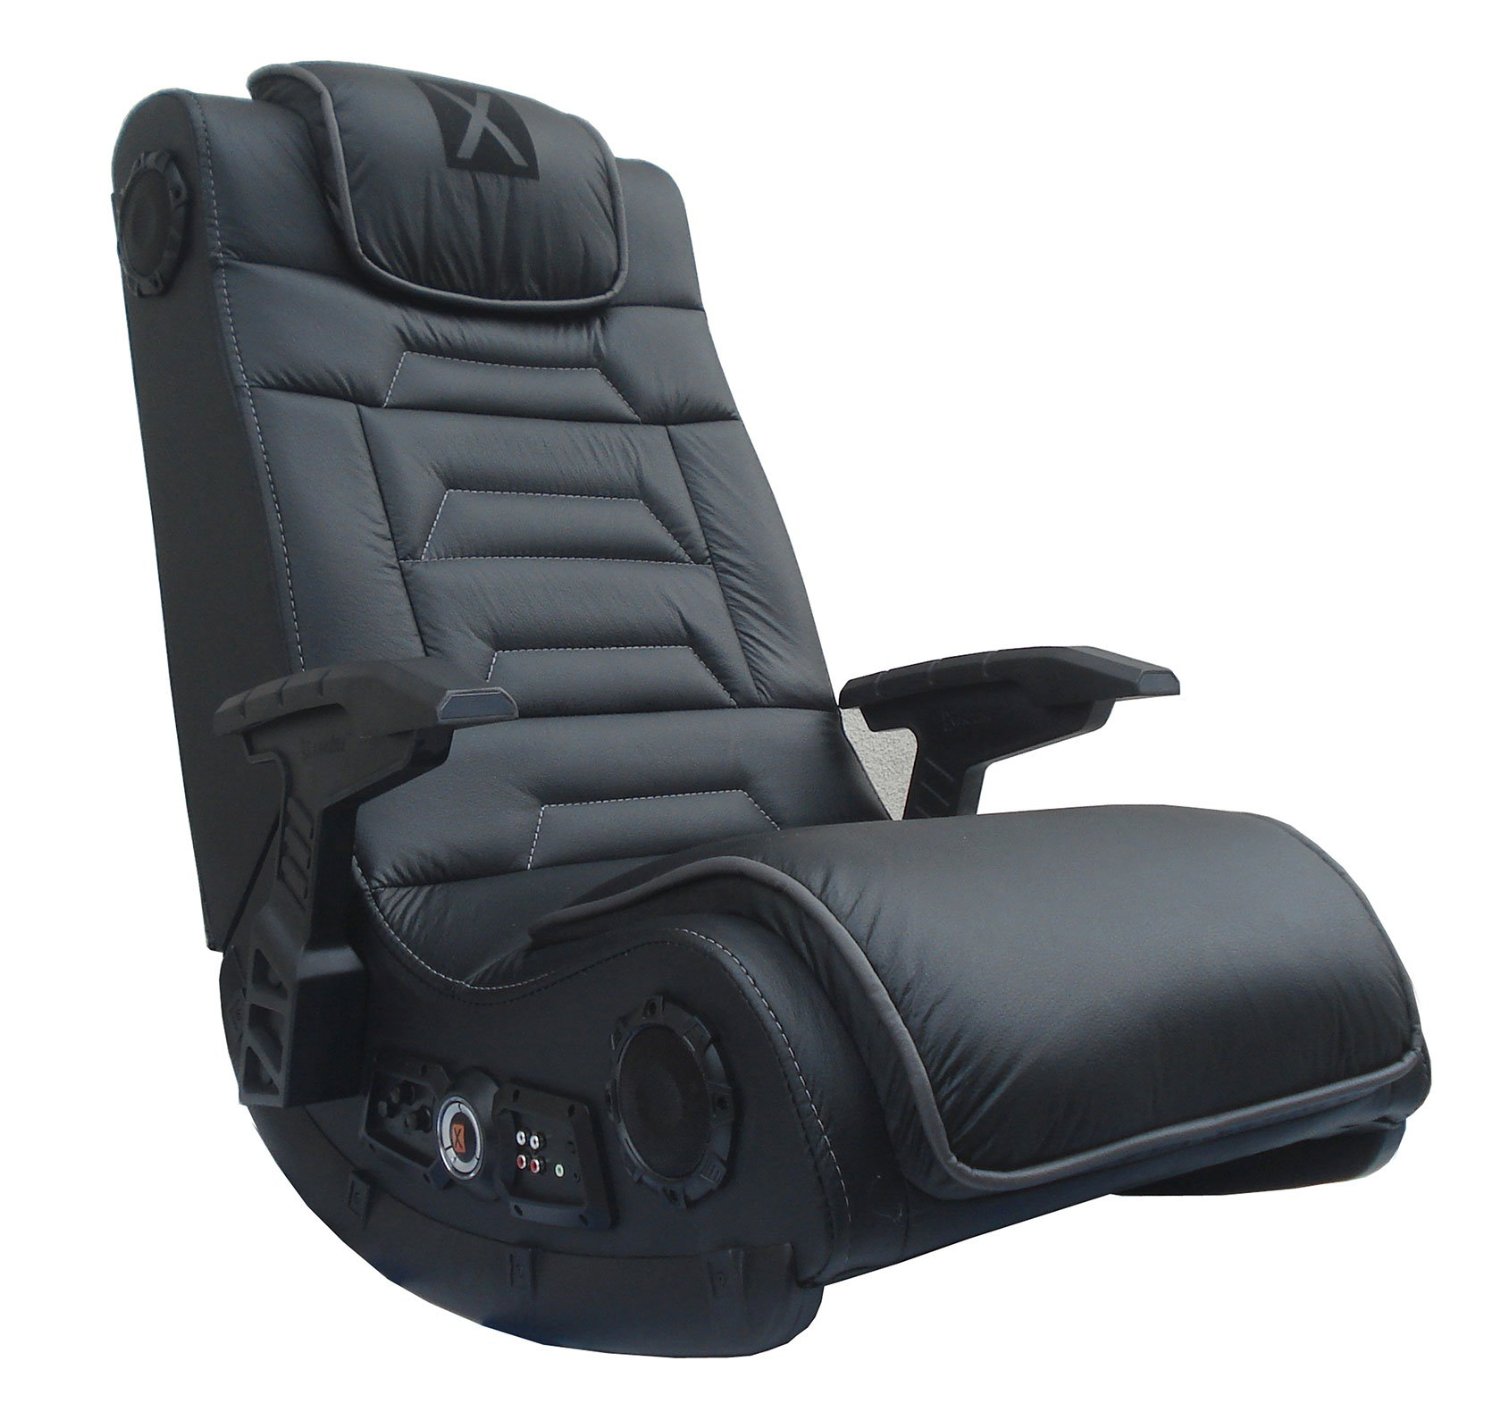 The Gamer’s “Cadillac”: The X Rocker Pro H3 Video Gaming Chair Wireless Black